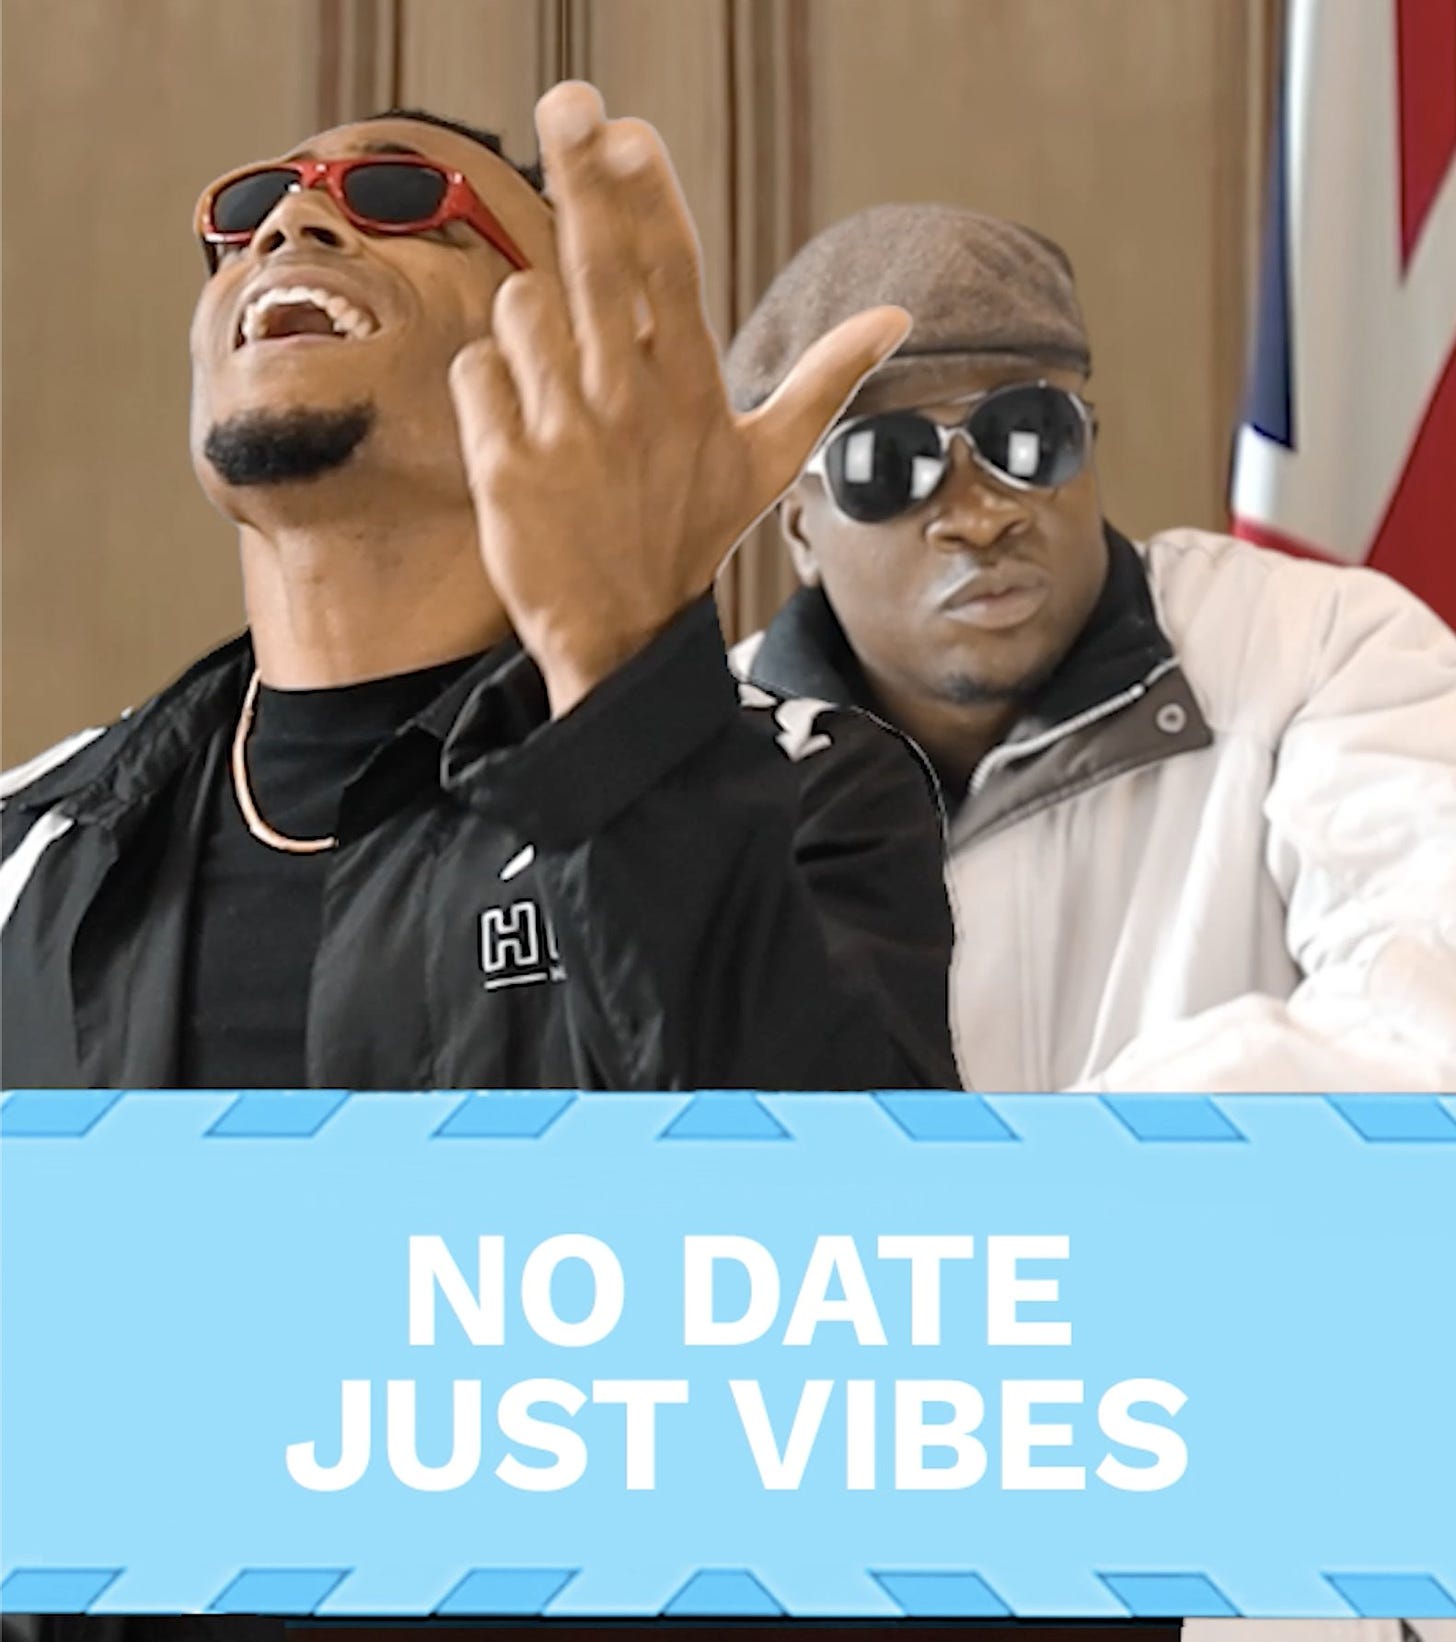 Munya Chawawa on Twitter: "June 21st is cancelled, so here's a parody to  ease the pain. You're Turning Your Back ft. @MichaelDapaah 😅🌝  (@_markmorrison Parody) #lockdownextension #Boris https://t.co/Svvt3CwYFd"  / Twitter